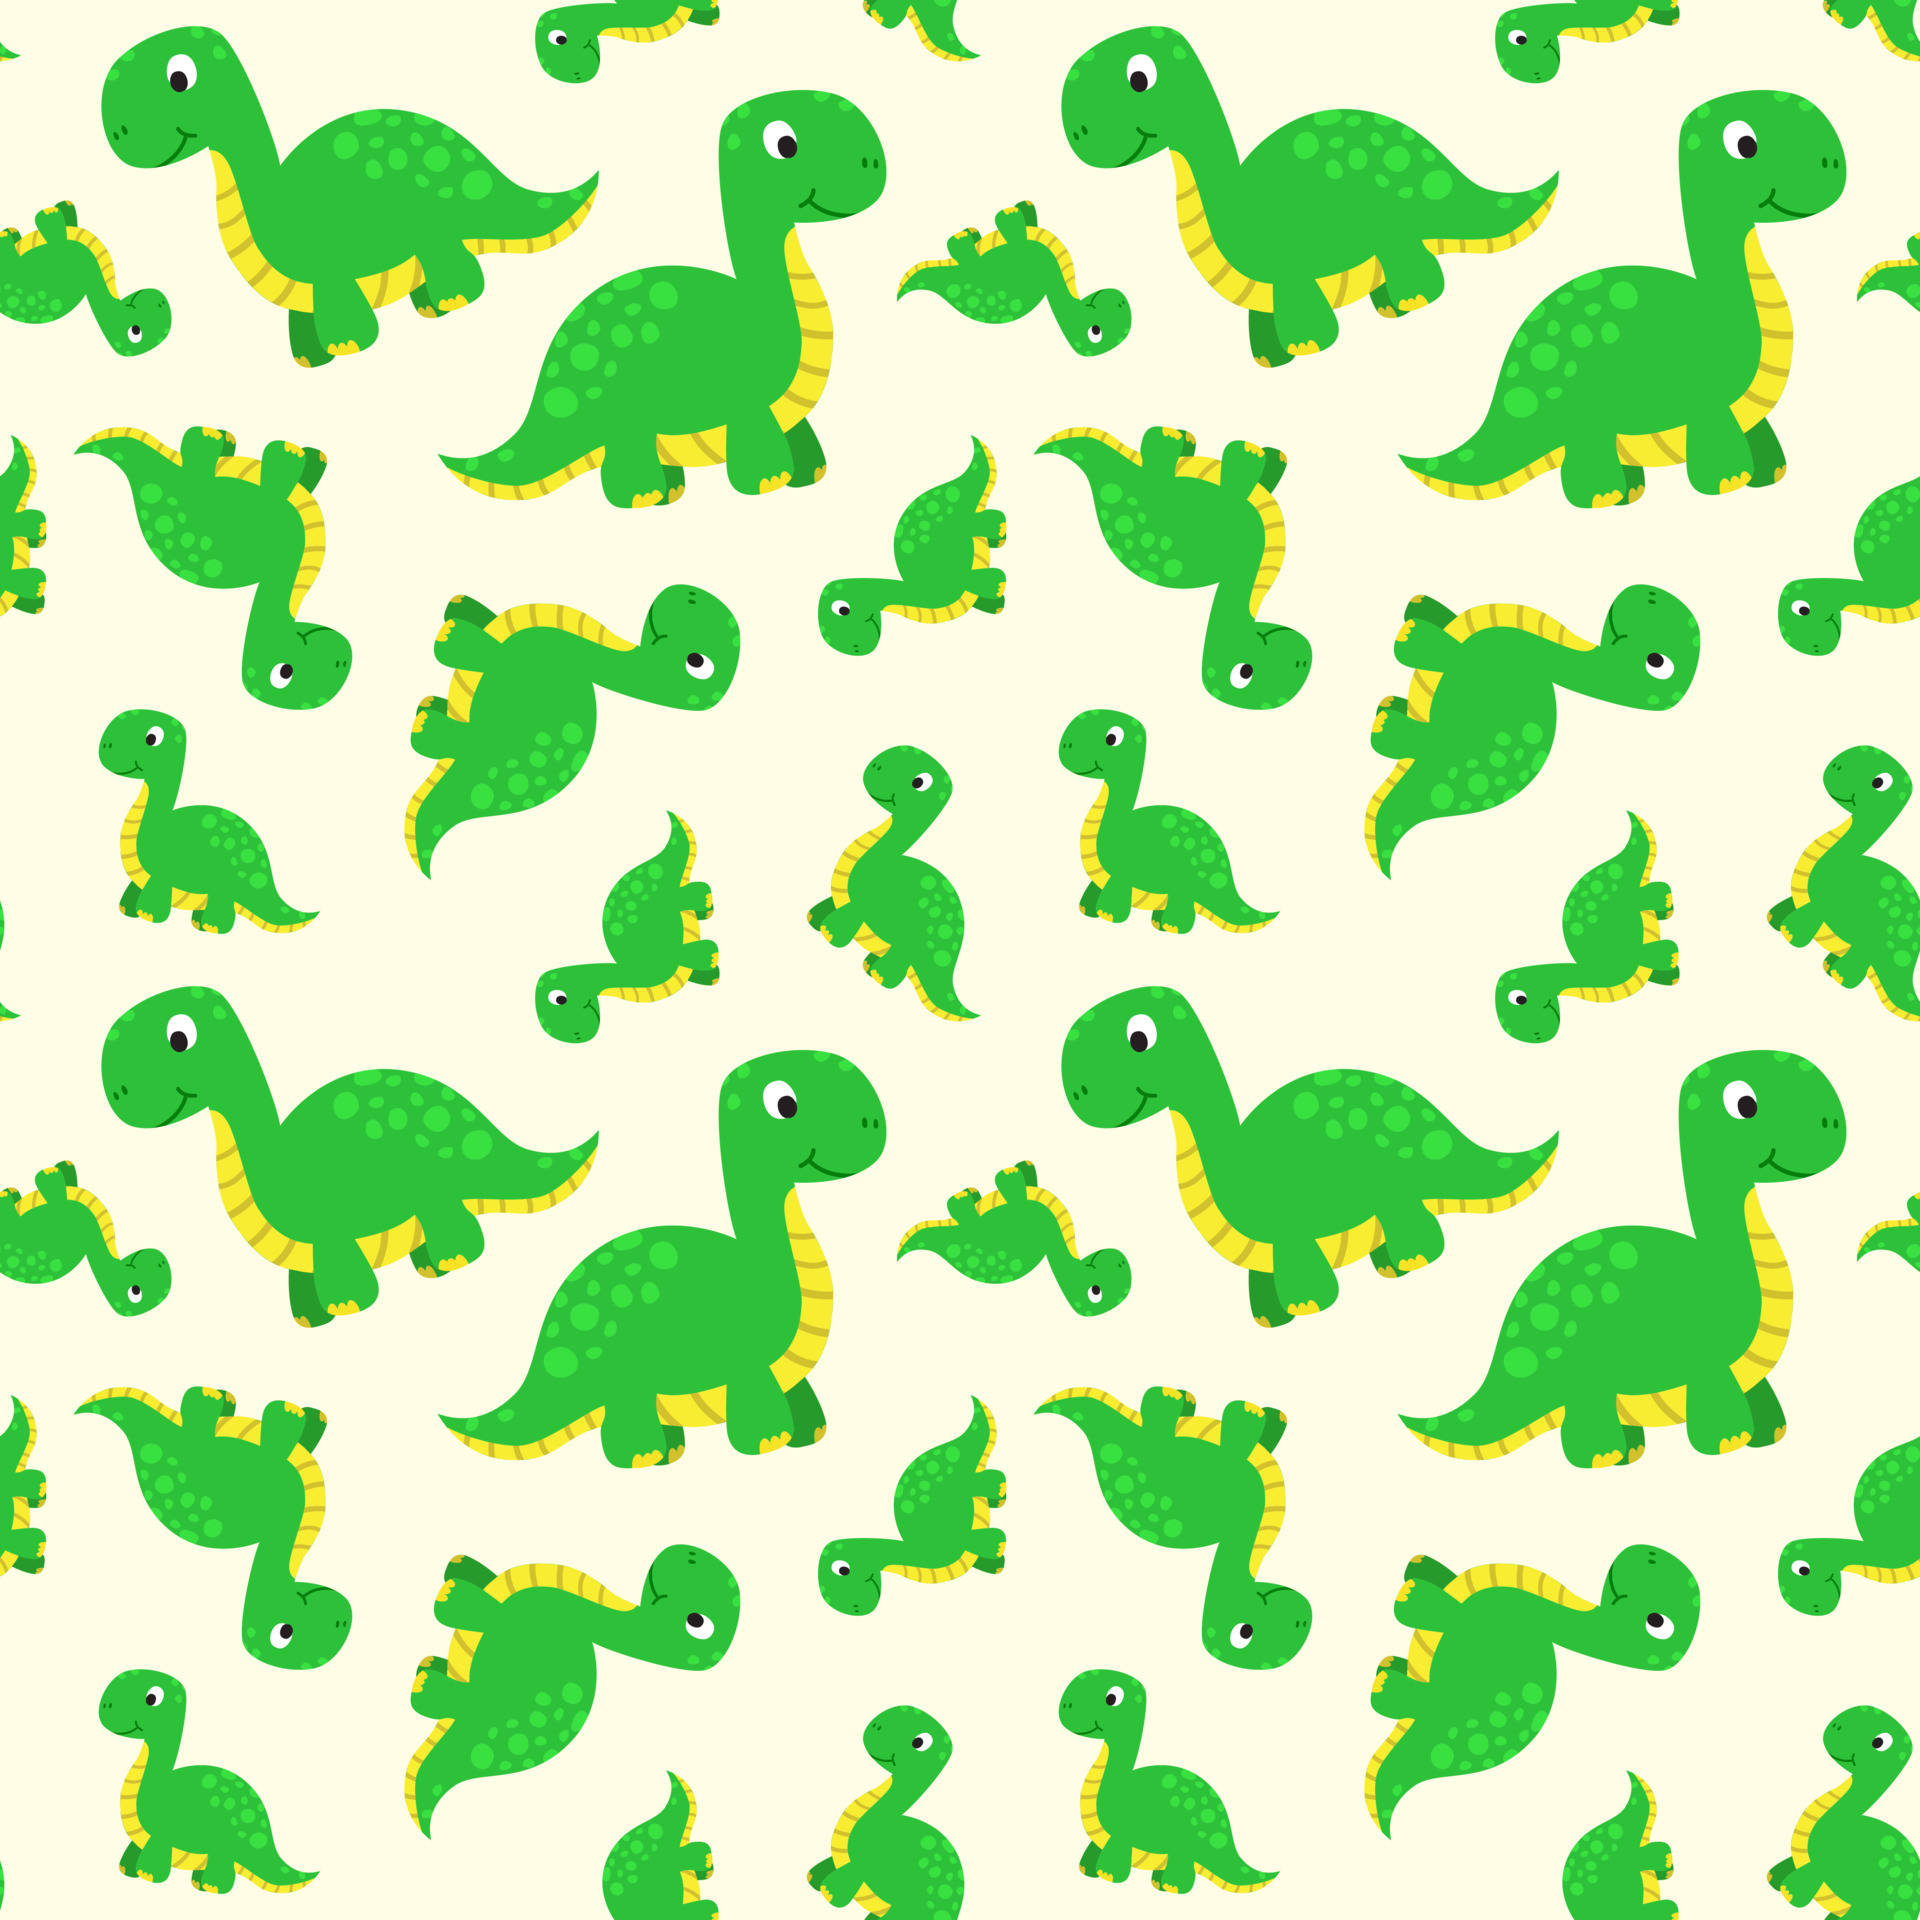 A Funny Dinosaur with a Big Smile Wallpaper